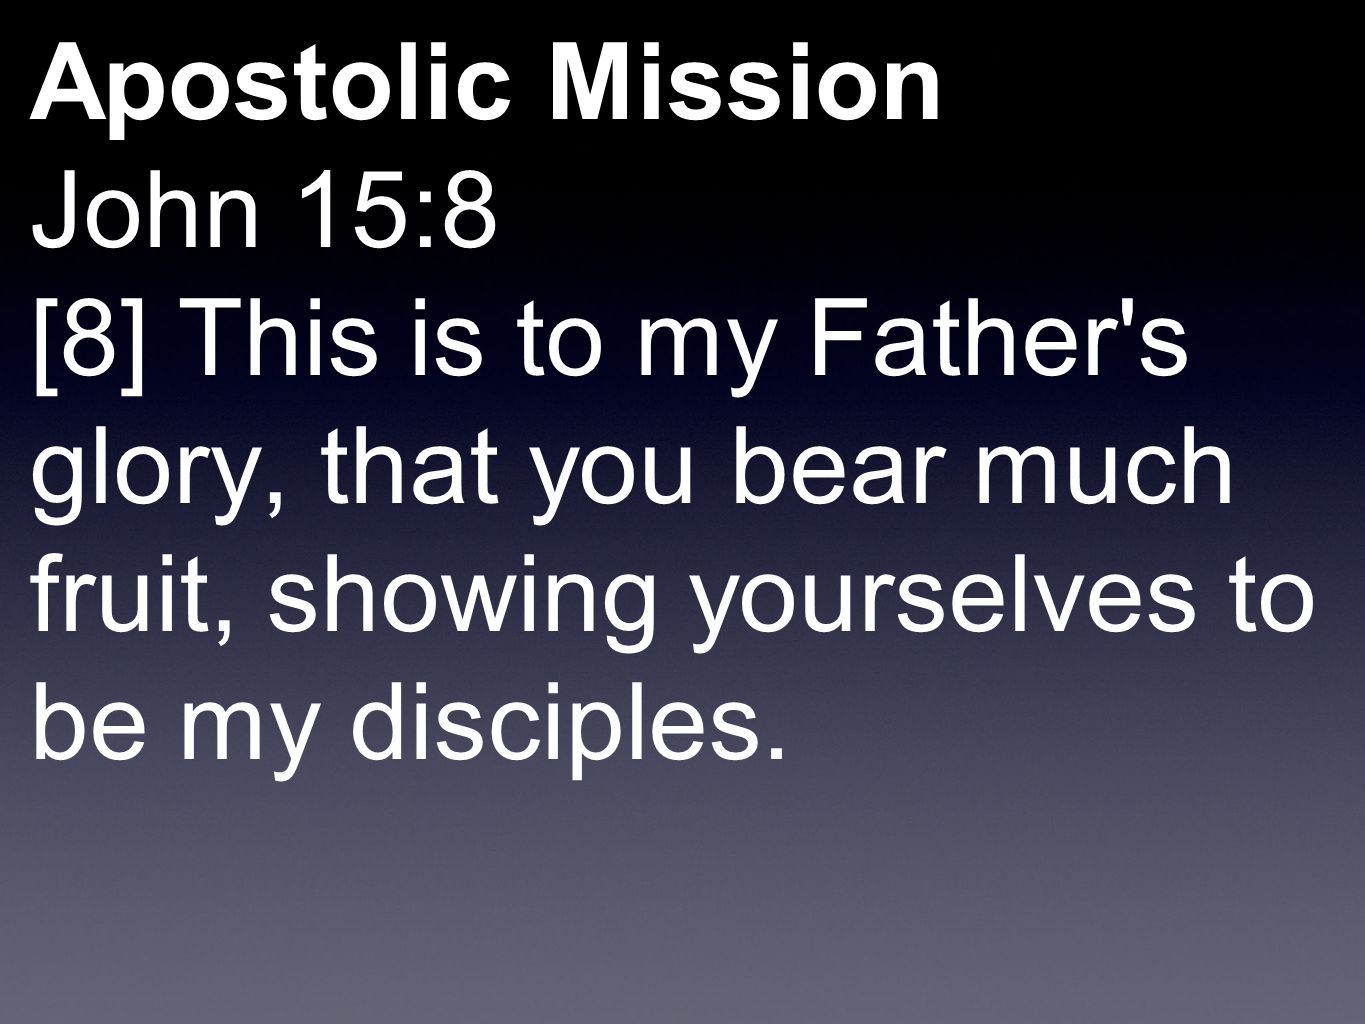 Apostolic Mission John 15:8 [8] This is to my Father s glory, that you bear much fruit, showing yourselves to be my disciples.